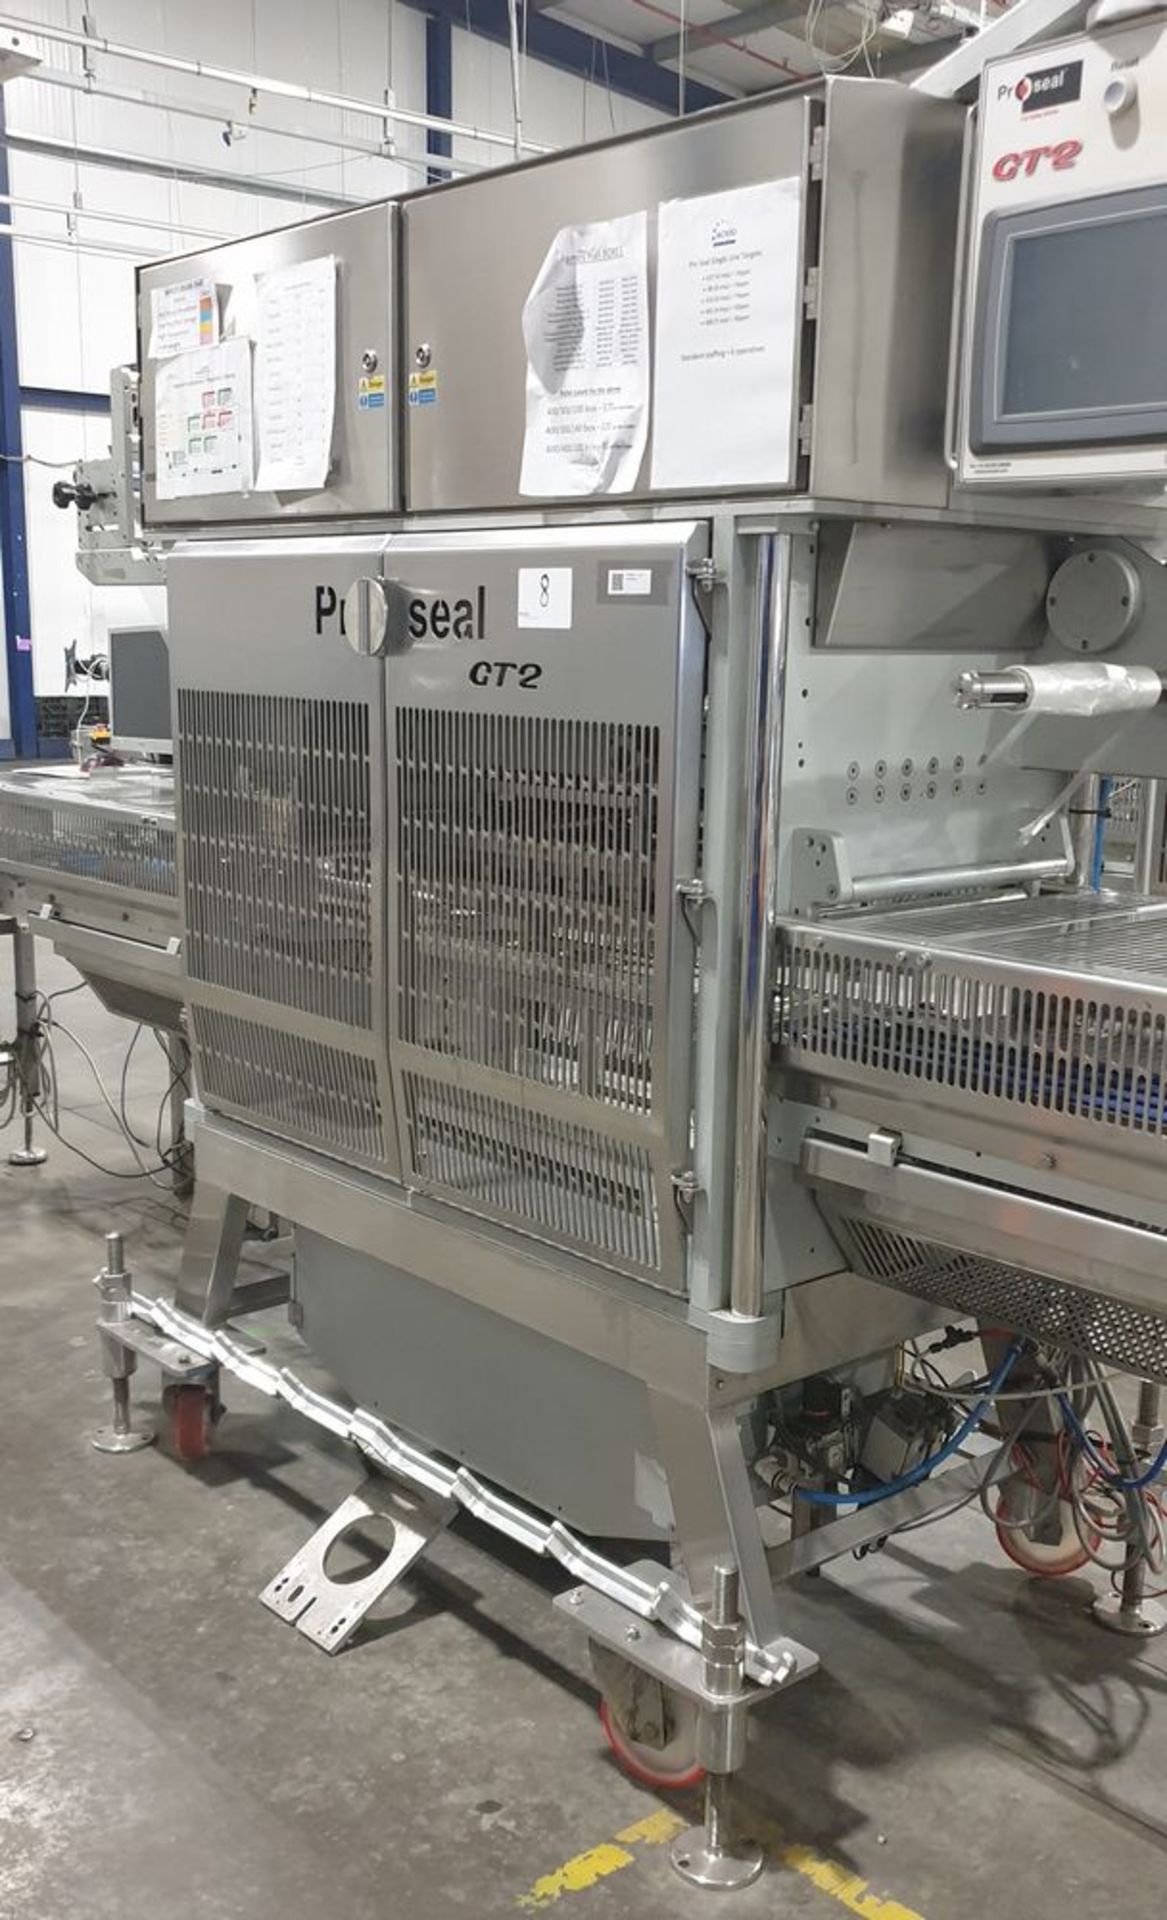 1: Proseal GT2 eSealing Machine with tooling shown - Image 4 of 6